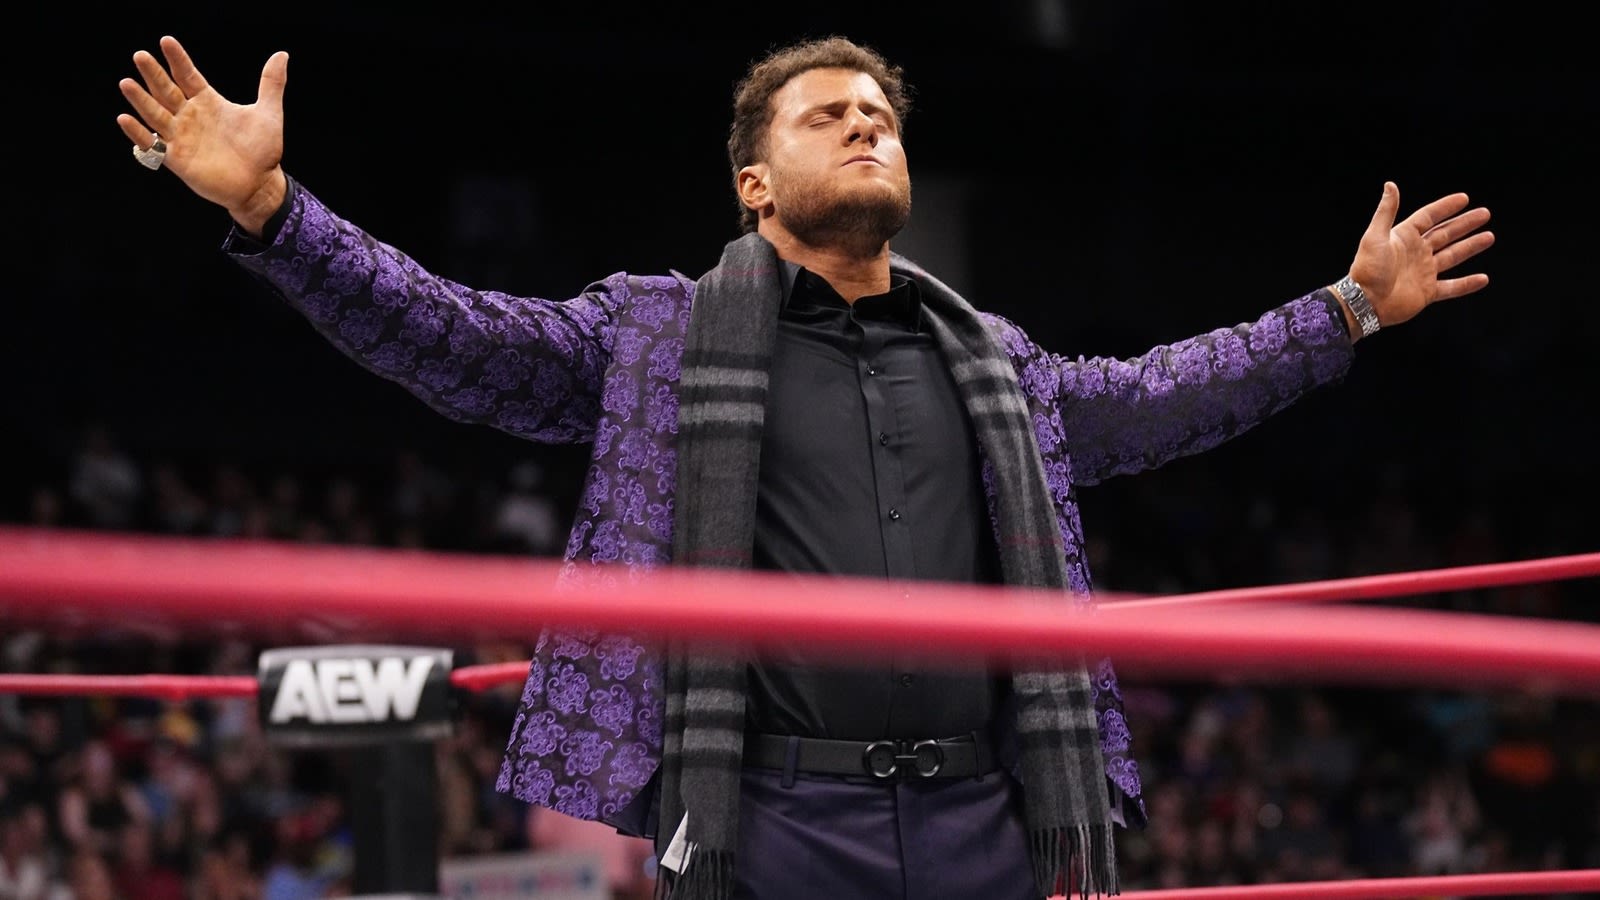 AEW's Jim Ross Explains Why He Thinks MJF 'Needs To Take A Deep Breath' - Wrestling Inc.